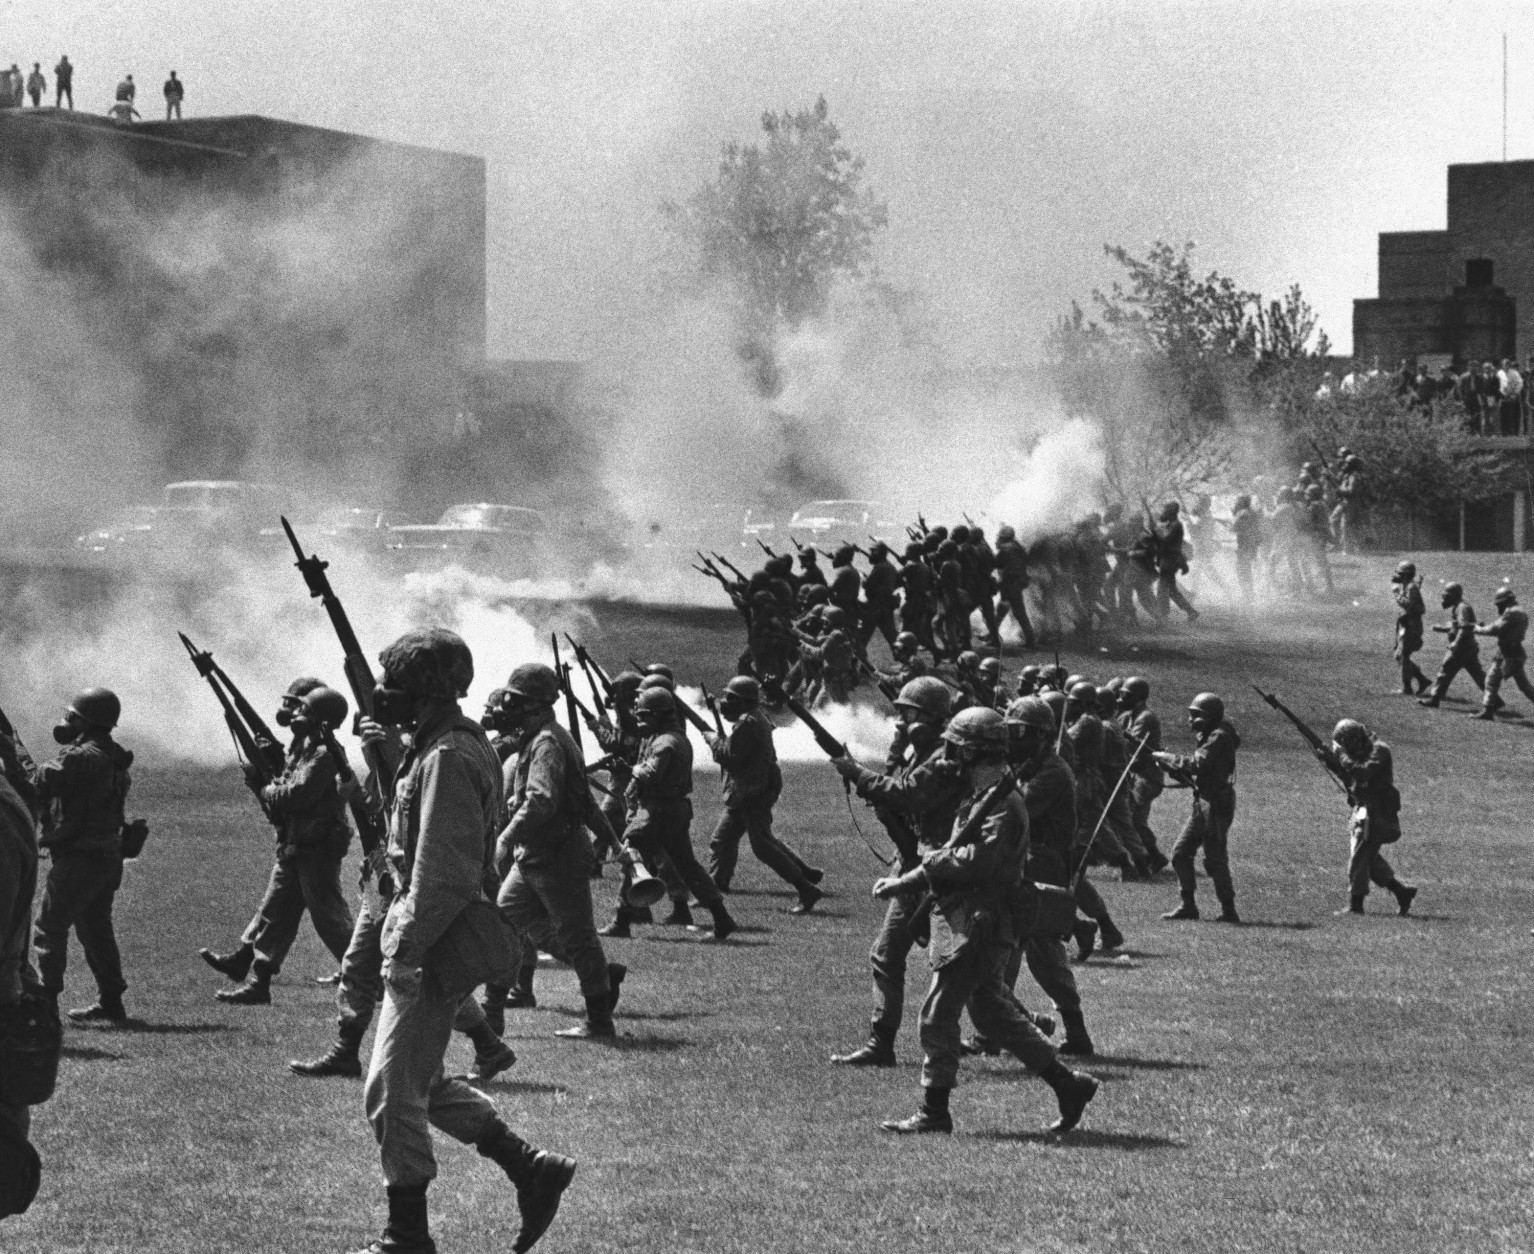 FILE - In a May 4, 1970 file photo, Ohio National Guard moves in on rioting students at Kent State University in Kent, Ohio. Four persons were killed and eleven wounded when National Guardsmen opened fire. The U.S. Justice Department, citing "insurmountable legal and evidentiary barriers," won't reopen its investigation into the deadly 1970 shootings by Ohio National Guardsmen during a Vietnam War protest at Kent State University. Assistant Attorney General Thomas Perez discussed the obstacles in a letter to Alan Canfora, a wounded student who requested that the investigation be reopened. The Justice Department said Tuesday, April 24, 2012 it would not comment beyond the letter.  (AP Photo, File)